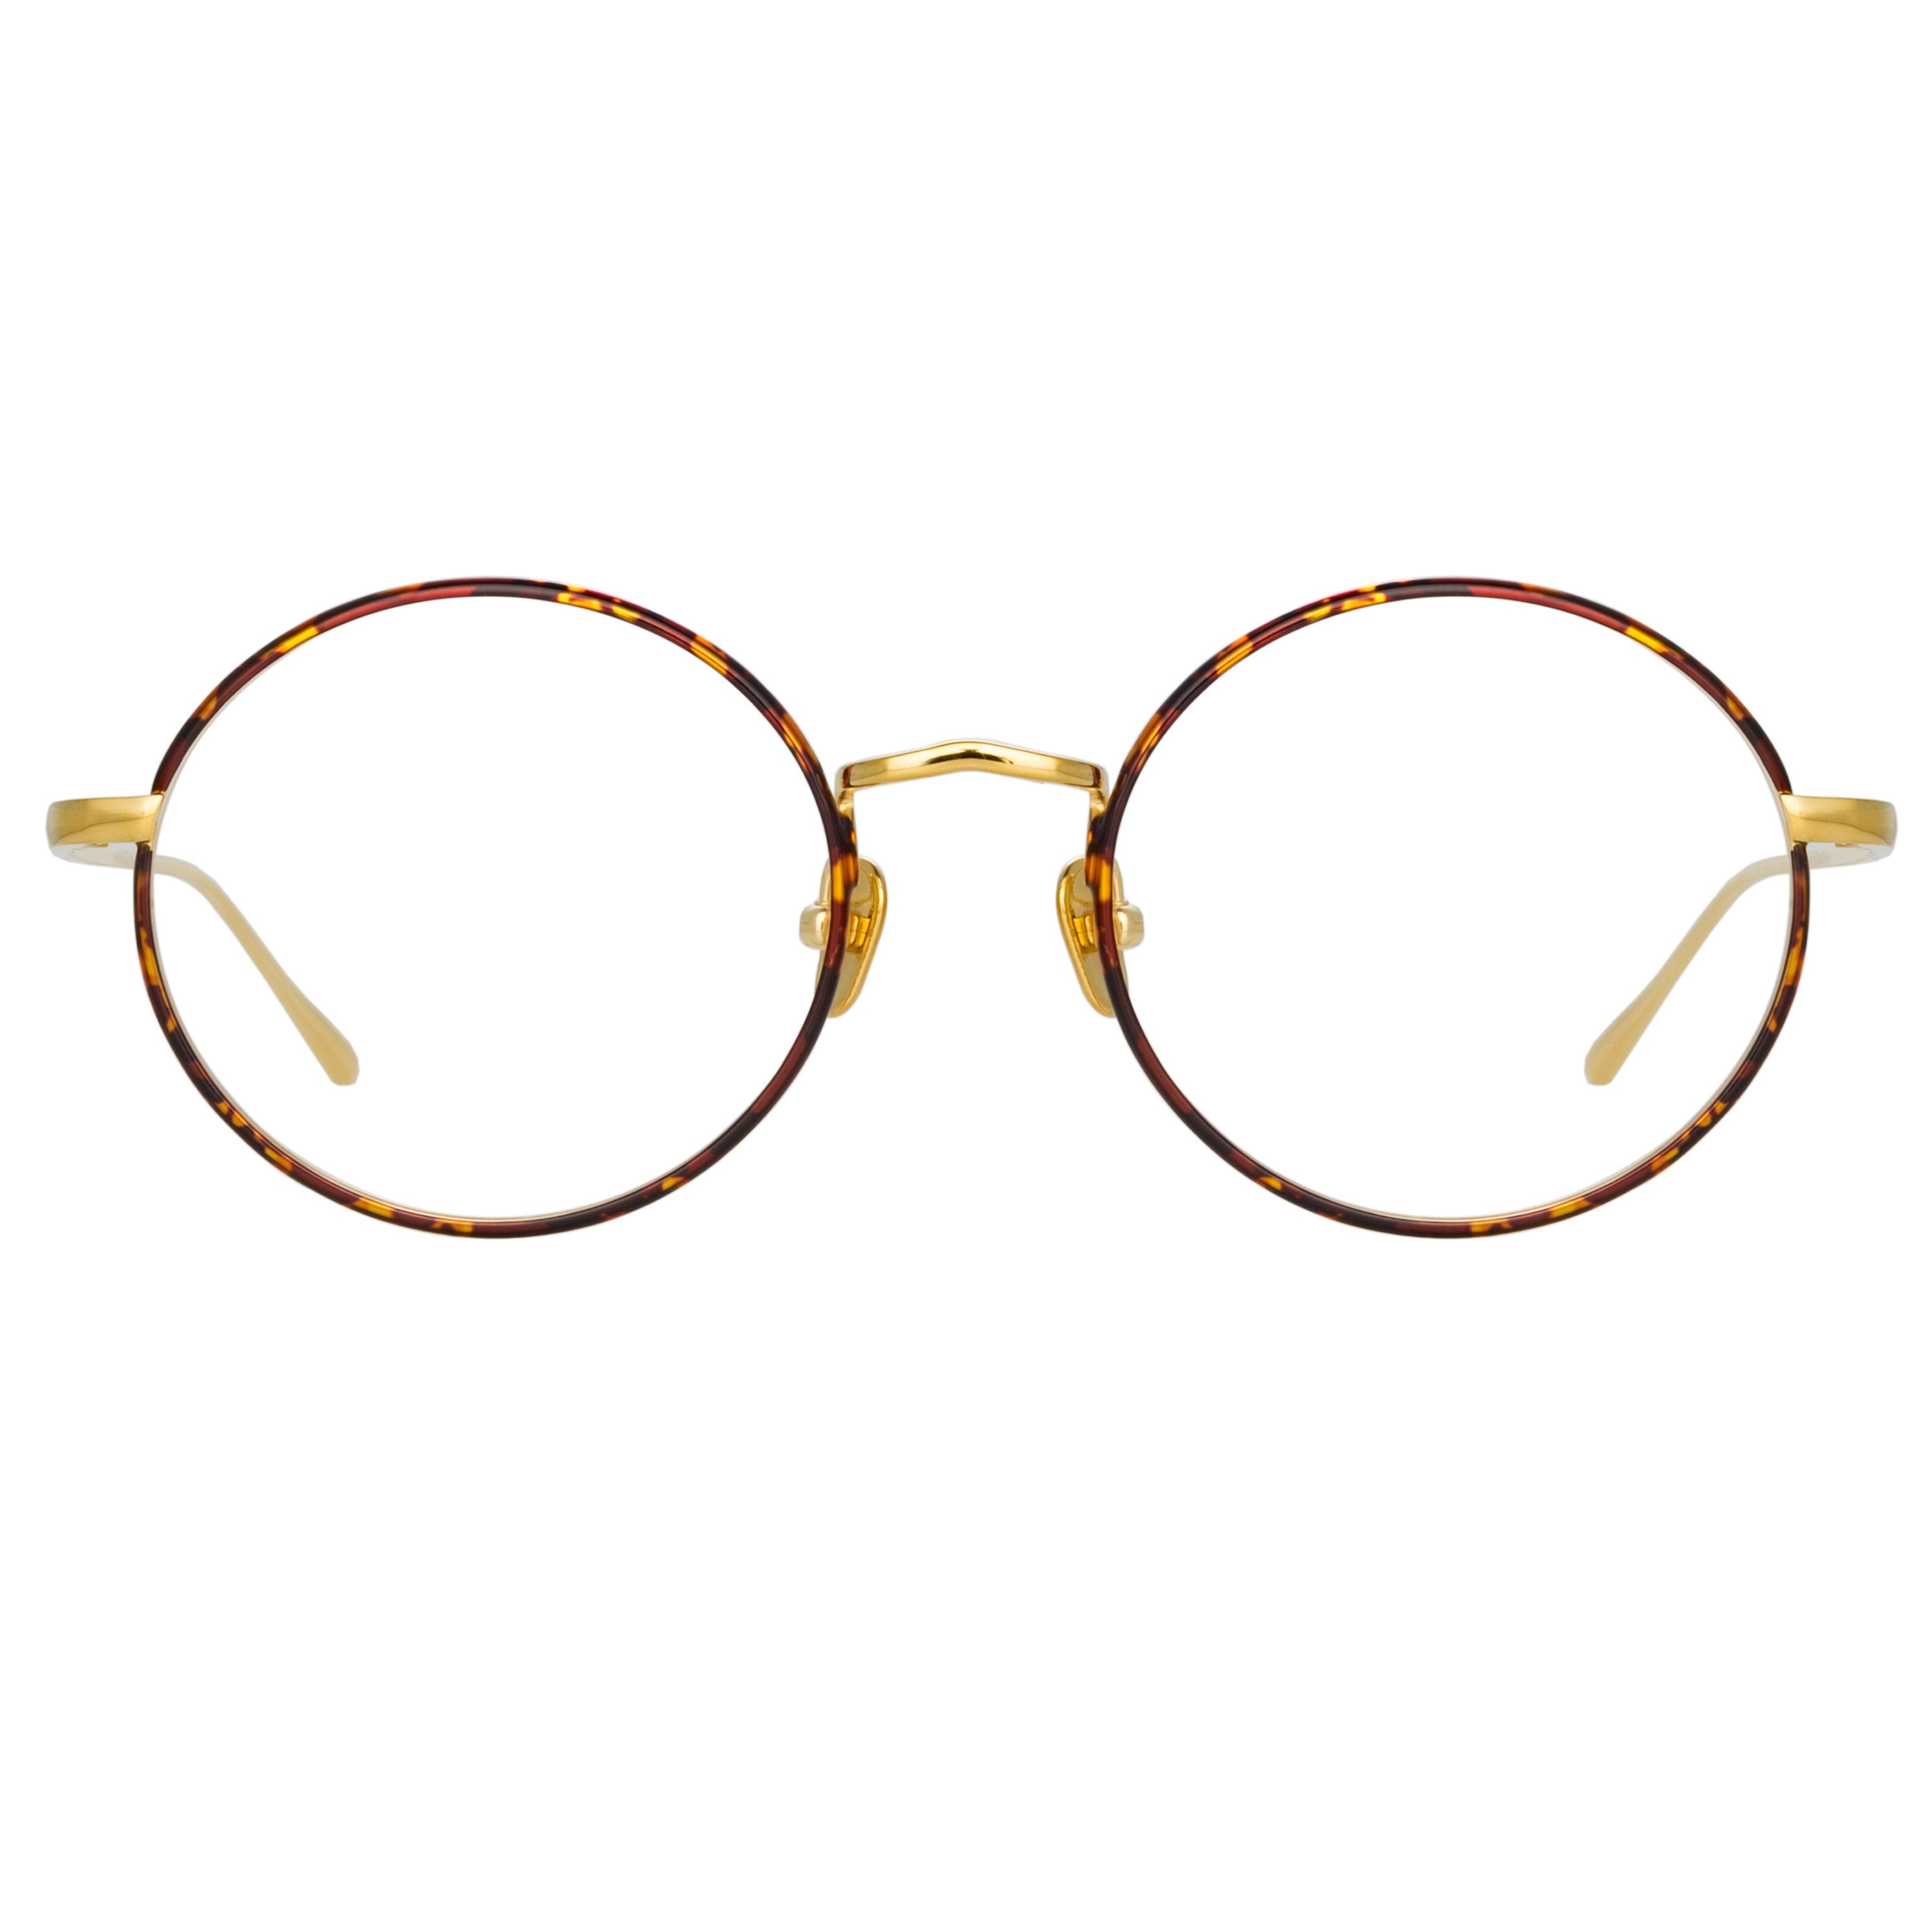 Color_LFL925C5OPT - Adams Oval Optical Frame in Yellow Gold and Tortoiseshell